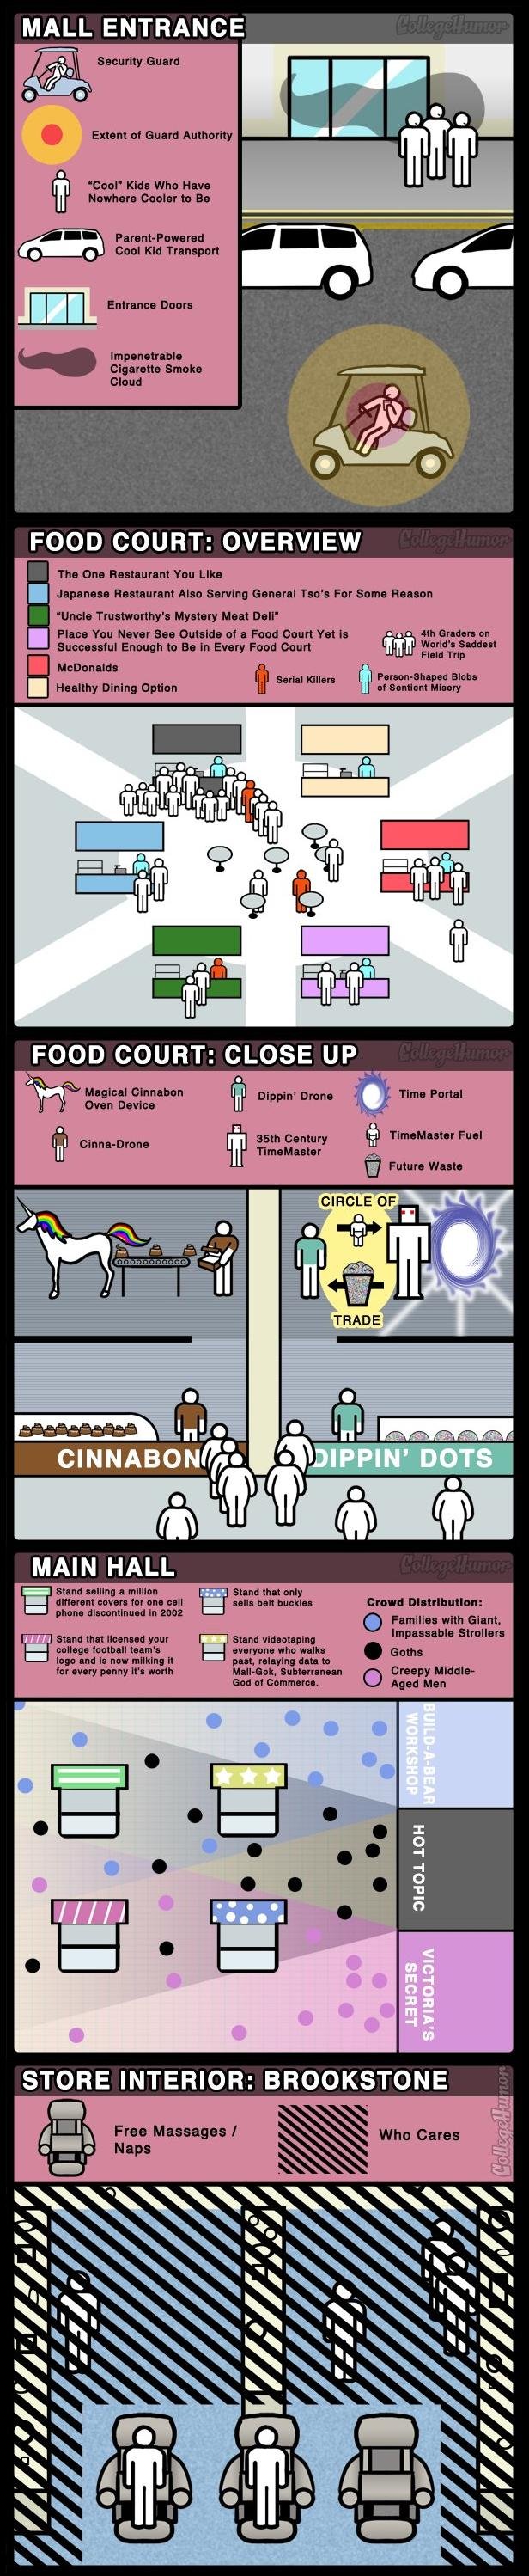 Honest Mall Map. I thought it was funny, i hope you guys do too.&lt;br /&gt; credit: collegehumor.com. MALL ENTRANCE FOOD COURT: OVERVIEW twa, Farr. tom.. LOSE 